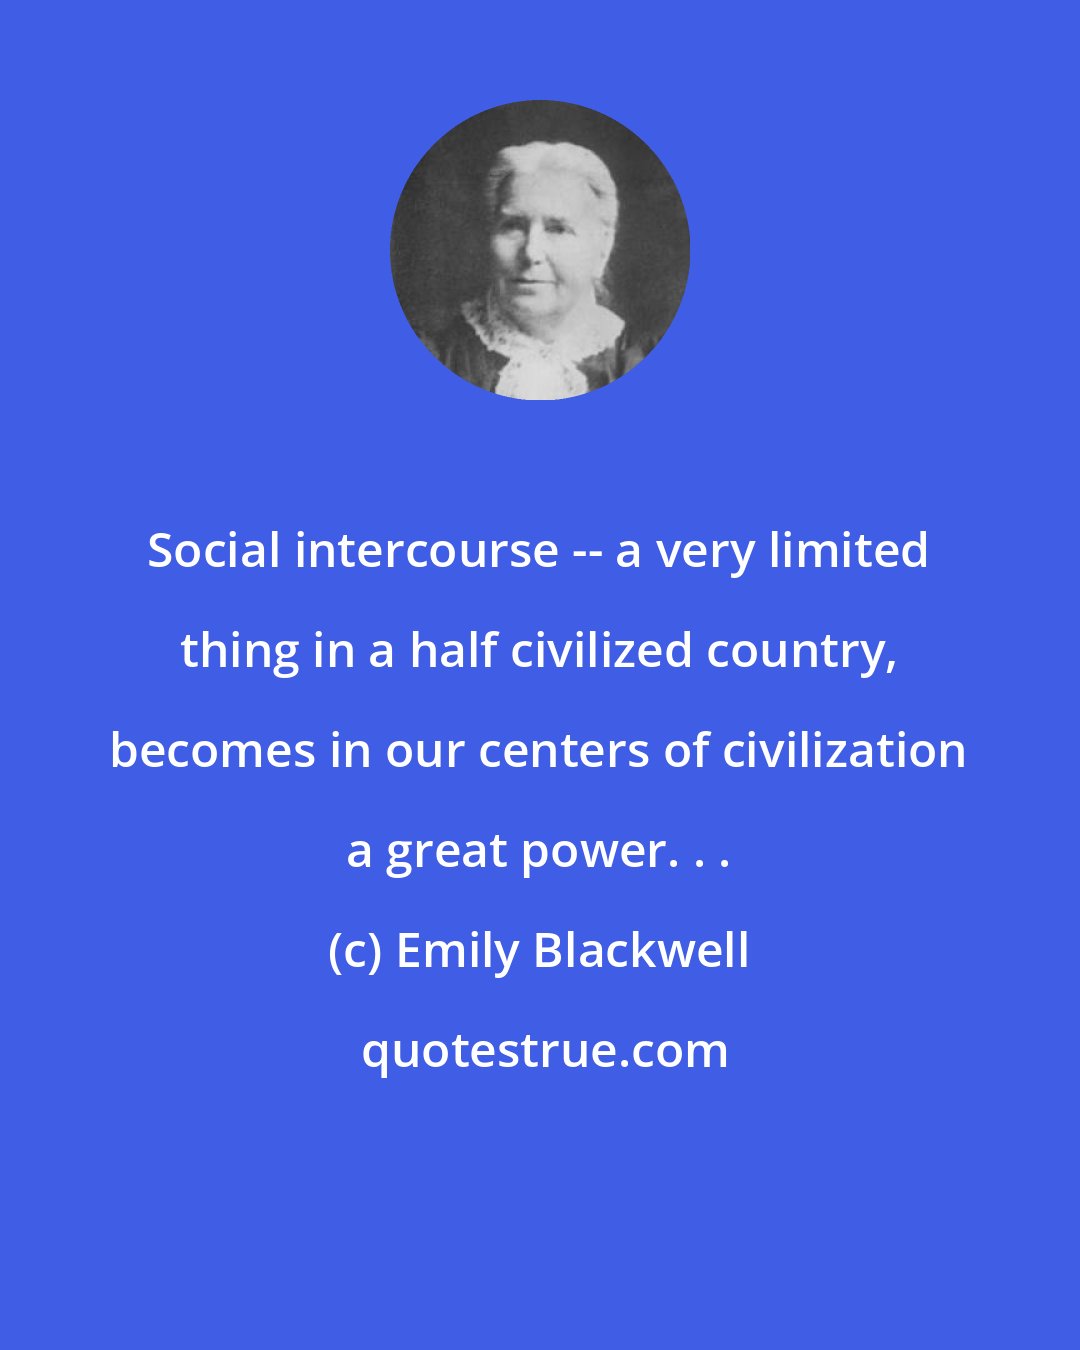 Emily Blackwell: Social intercourse -- a very limited thing in a half civilized country, becomes in our centers of civilization a great power. . .